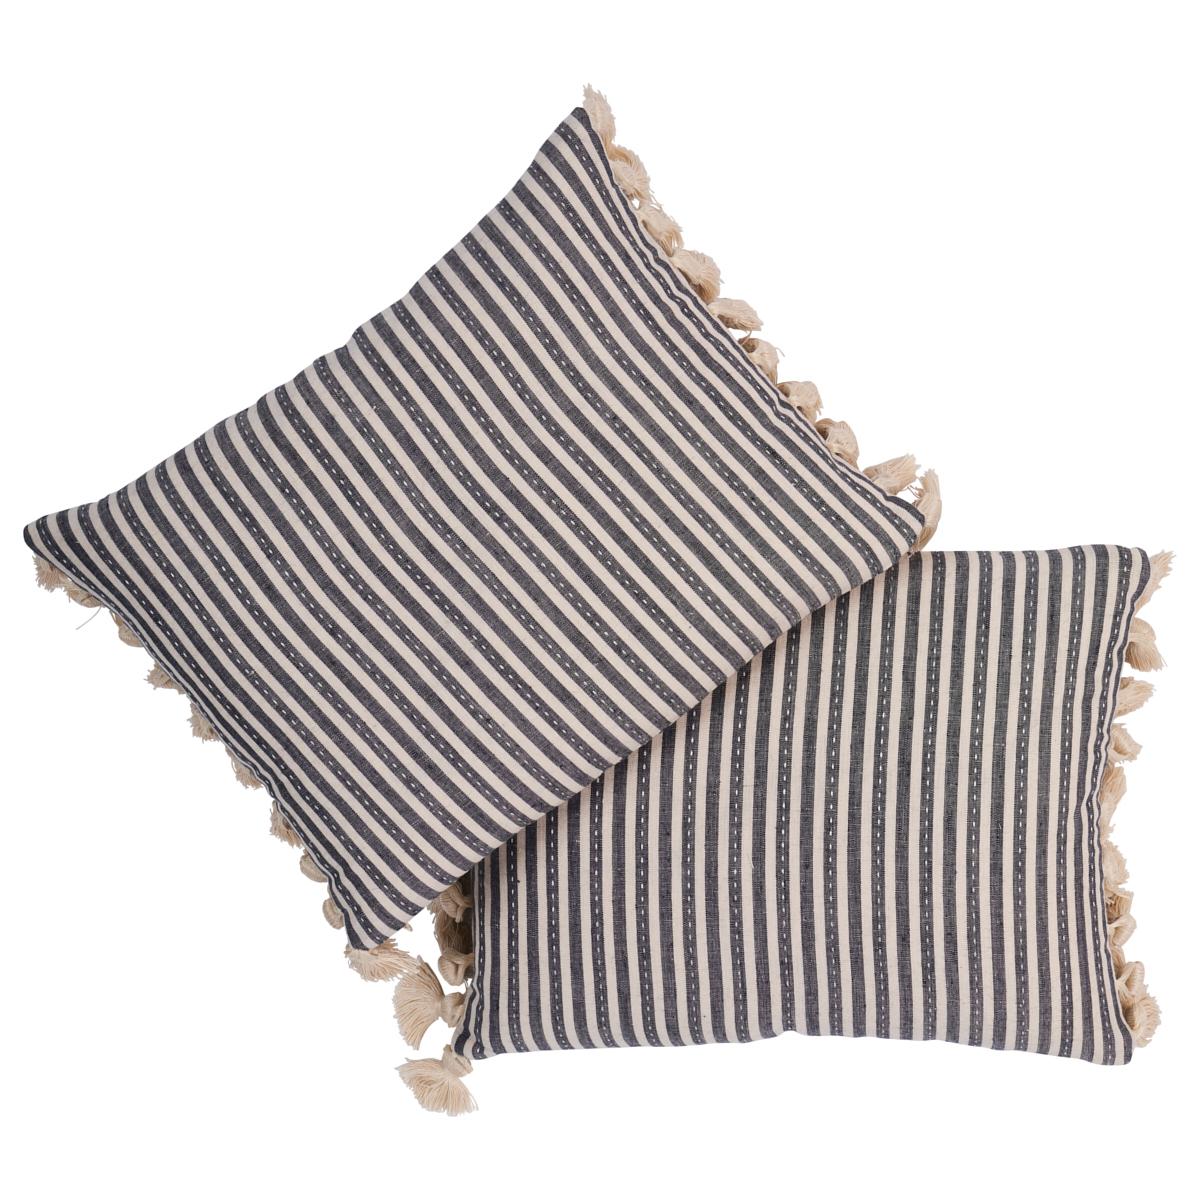 This pillow features Mathias Ticking Stripe with a knife edge finish on top and bottom. Printed on a linen-hemp blend with a running-stitch detail, Mathis Ticking Stripe in carbon is an interesting, textural take on traditional mattress ticking.